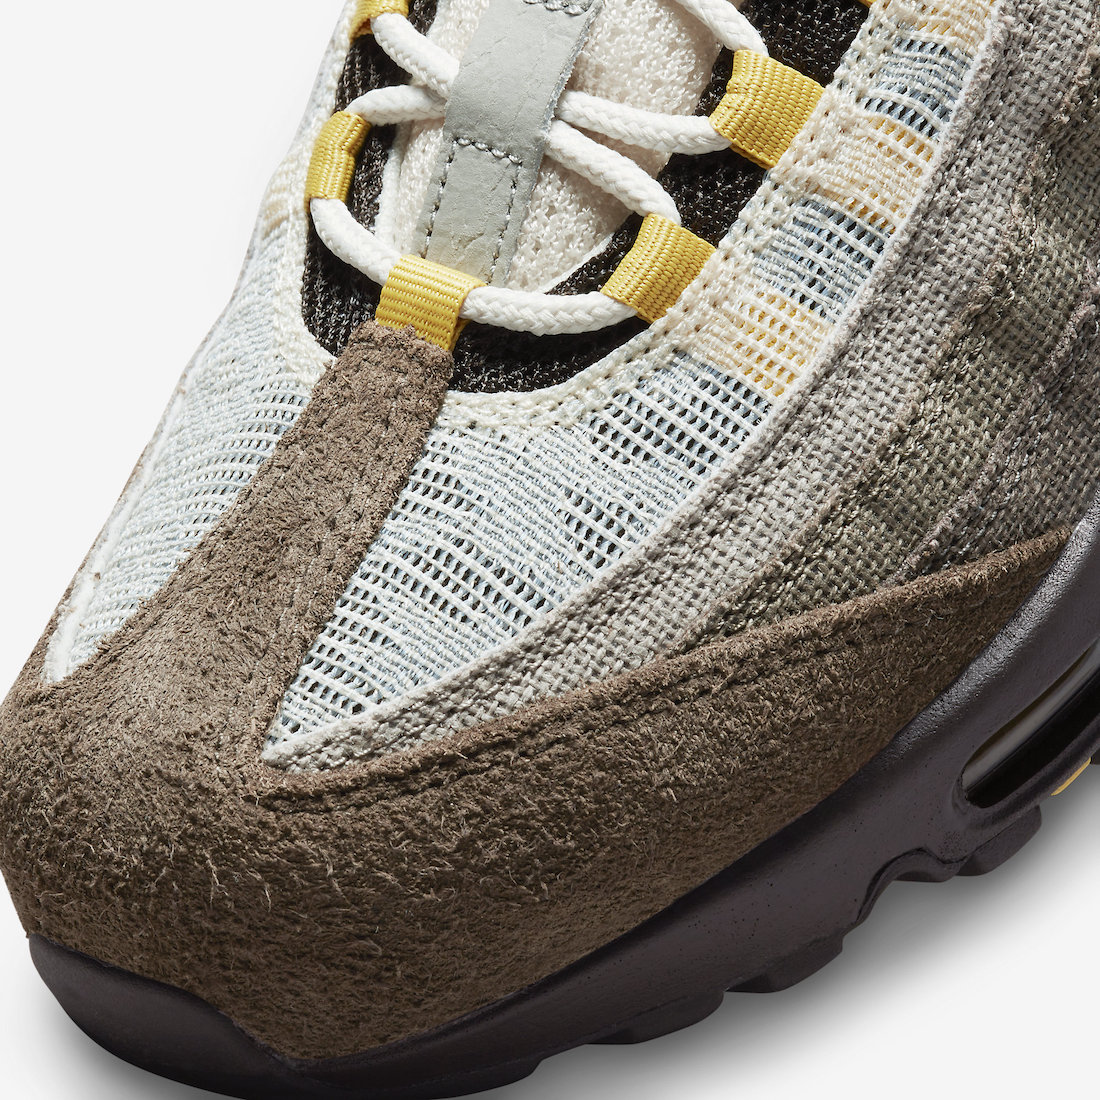 Nike-Air-Max-95-Ironstone-Celery-Cave-Stone-Olive-Grey-DR0146-001-Release-Date-6